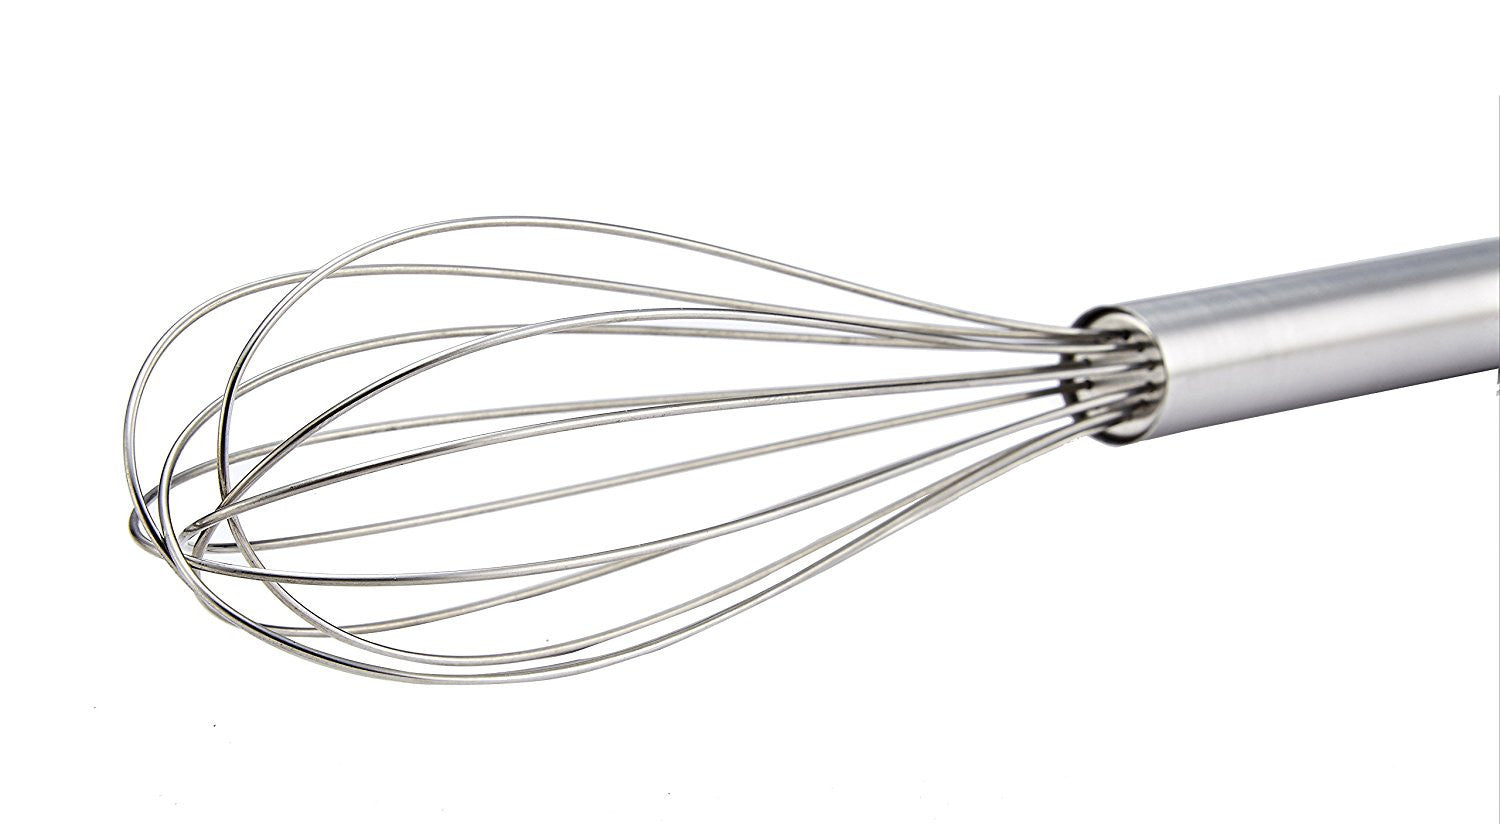 Stainless Double Balloon Whisk Review